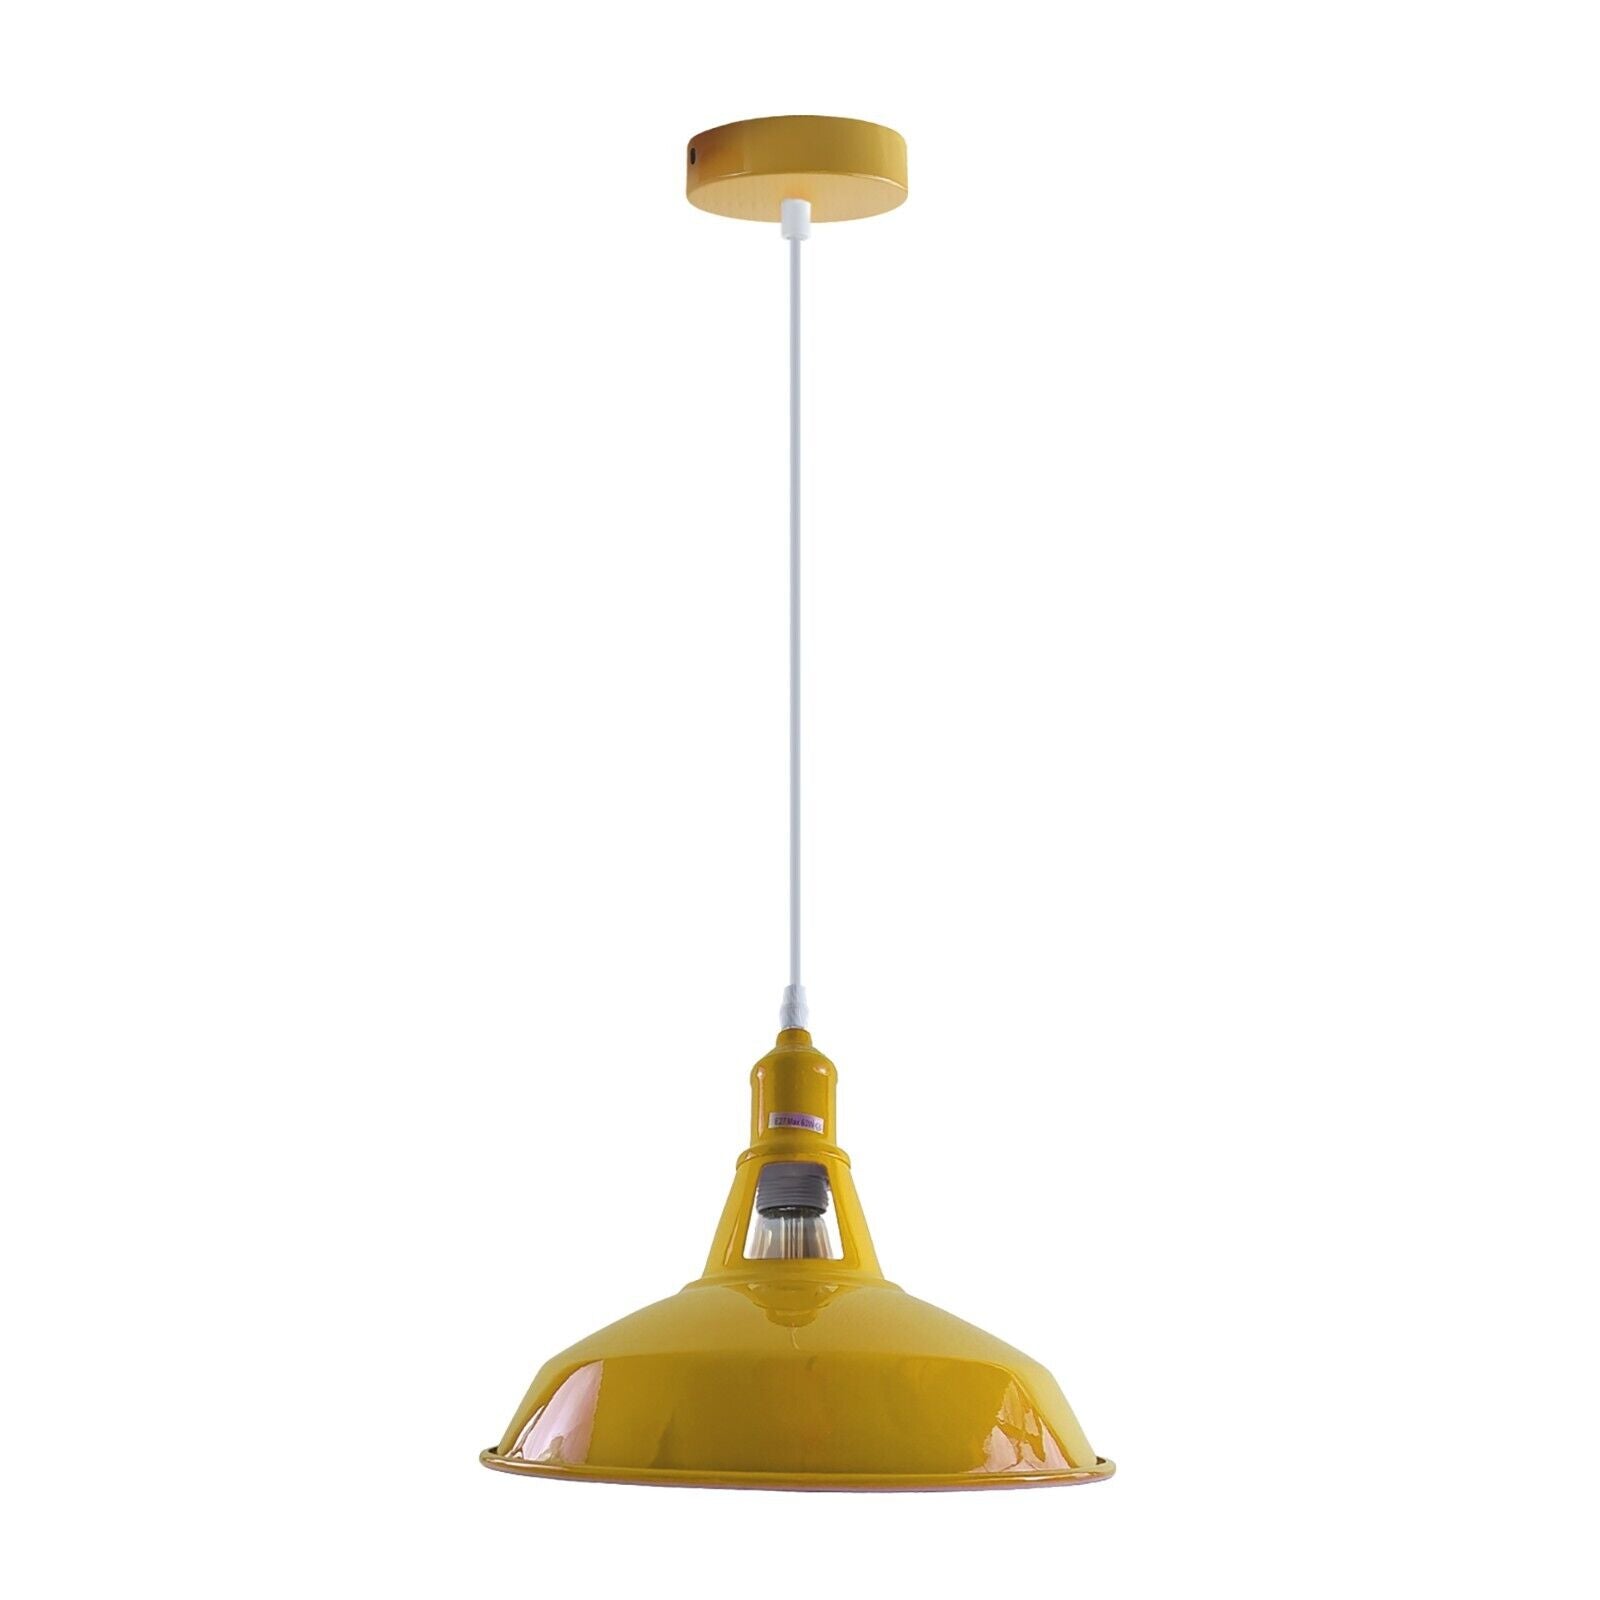 Yellow pendant lamp for a classic touch